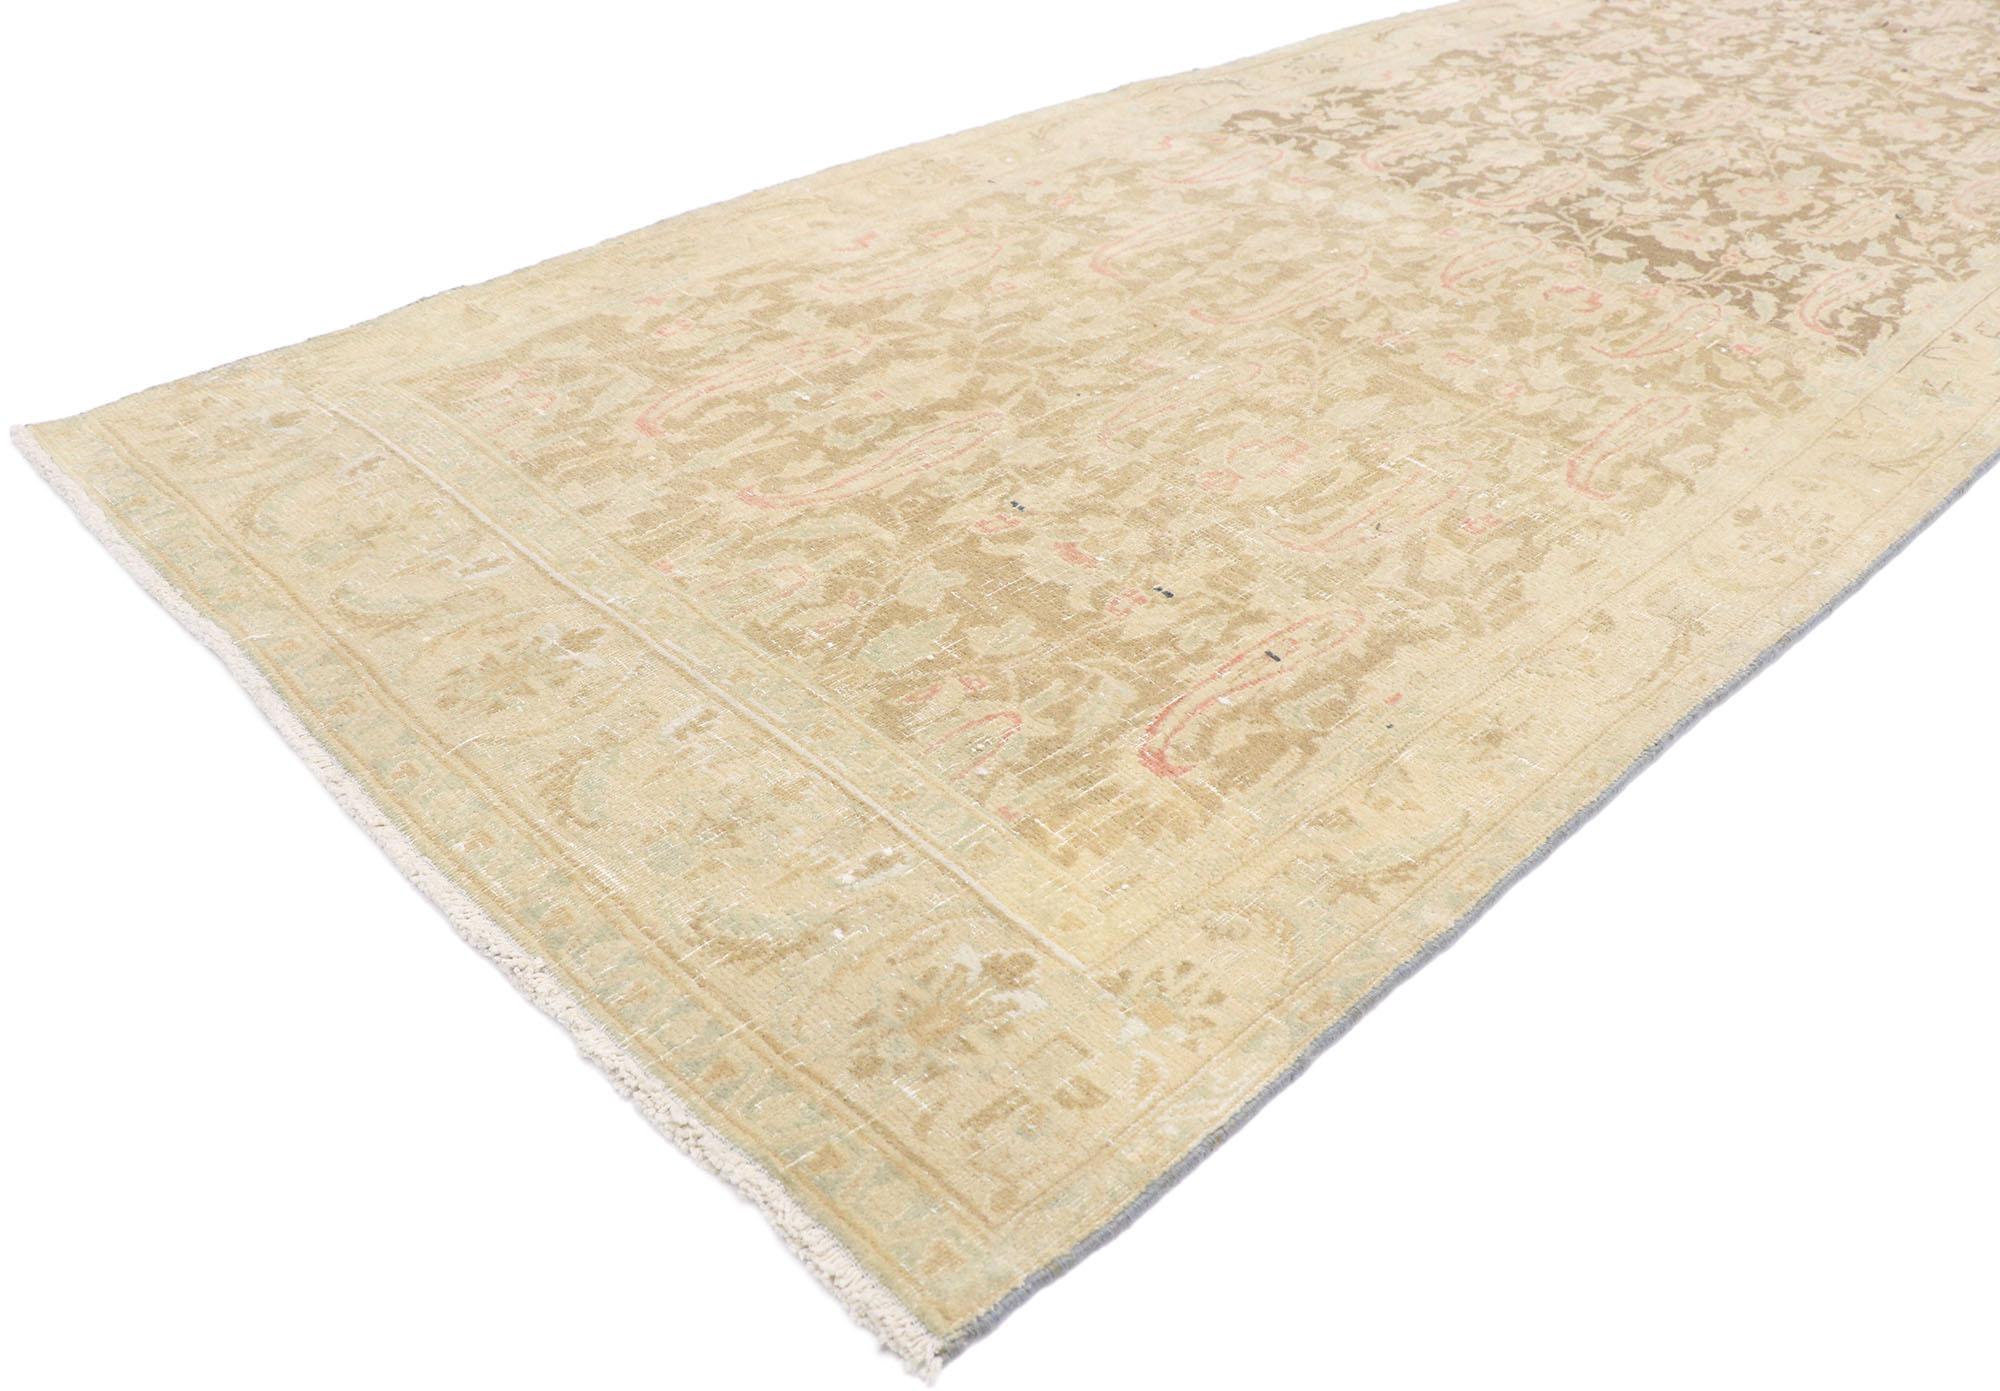 60857 Distressed Antique Persian Tabriz runner with Swedish Farmhouse Cottage style 03'05 x 12'01. Take a timeless, tailored design, mix in a dash of romantic connotations and antique-washed colors to get this fresh look that’s as comfortable as it